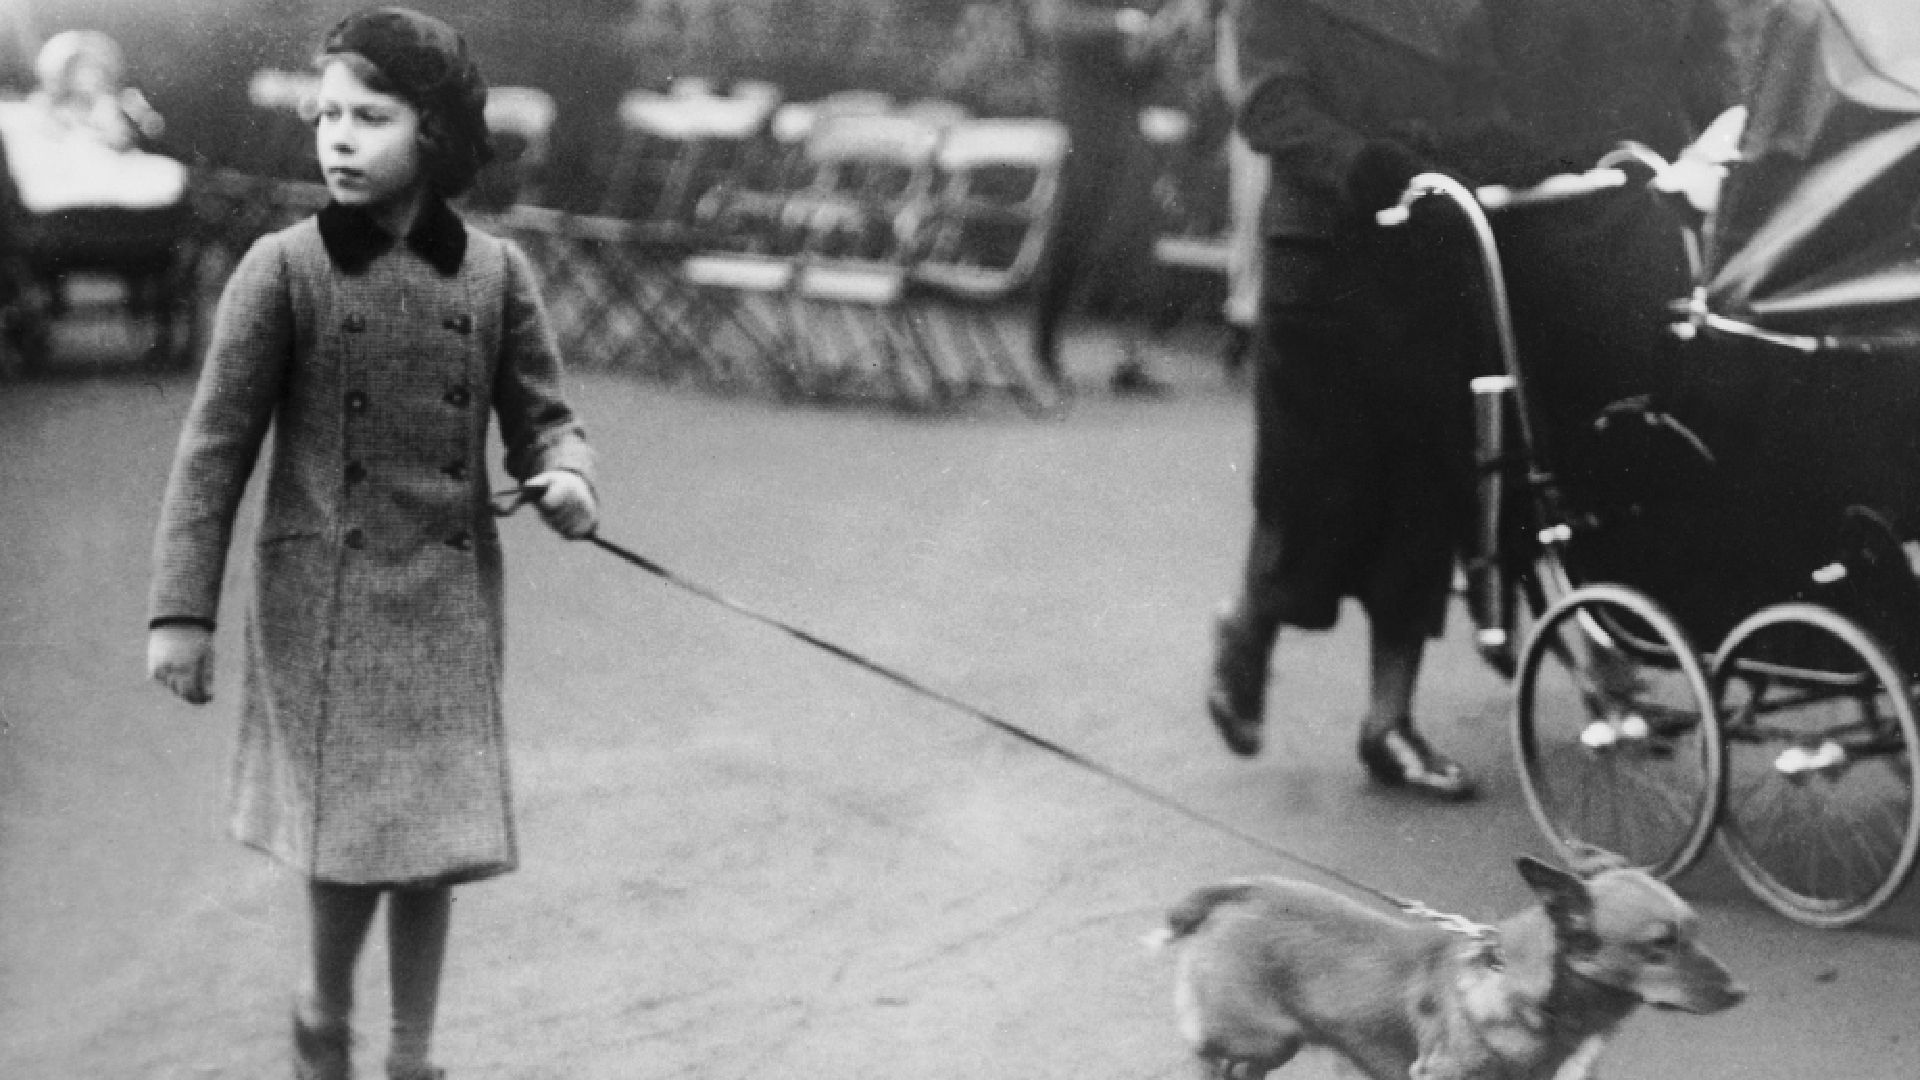 <p>                     Queen Elizabeth II is well known for her love of corgis, which started at a young age. Here the future Queen is pictured with two pet corgi dogs at her home in at 145 Piccadilly in London in 1936. Royal biographer Angela Kelly described how the dogs were a "godsend" during the 2020 lockdown, explaining (via <a href="https://www.townandcountrymag.com/society/tradition/a39751254/queen-elizabeths-corgis-pandemic-lockdown-quotes/" rel="nofollow"><em>Town&Country</em></a>), "I was worried they would get under The Queen's feet, but they have turned out to be a godsend. They are beautiful and great fun and The Queen often takes long walks with them in Home Park."                   </p>